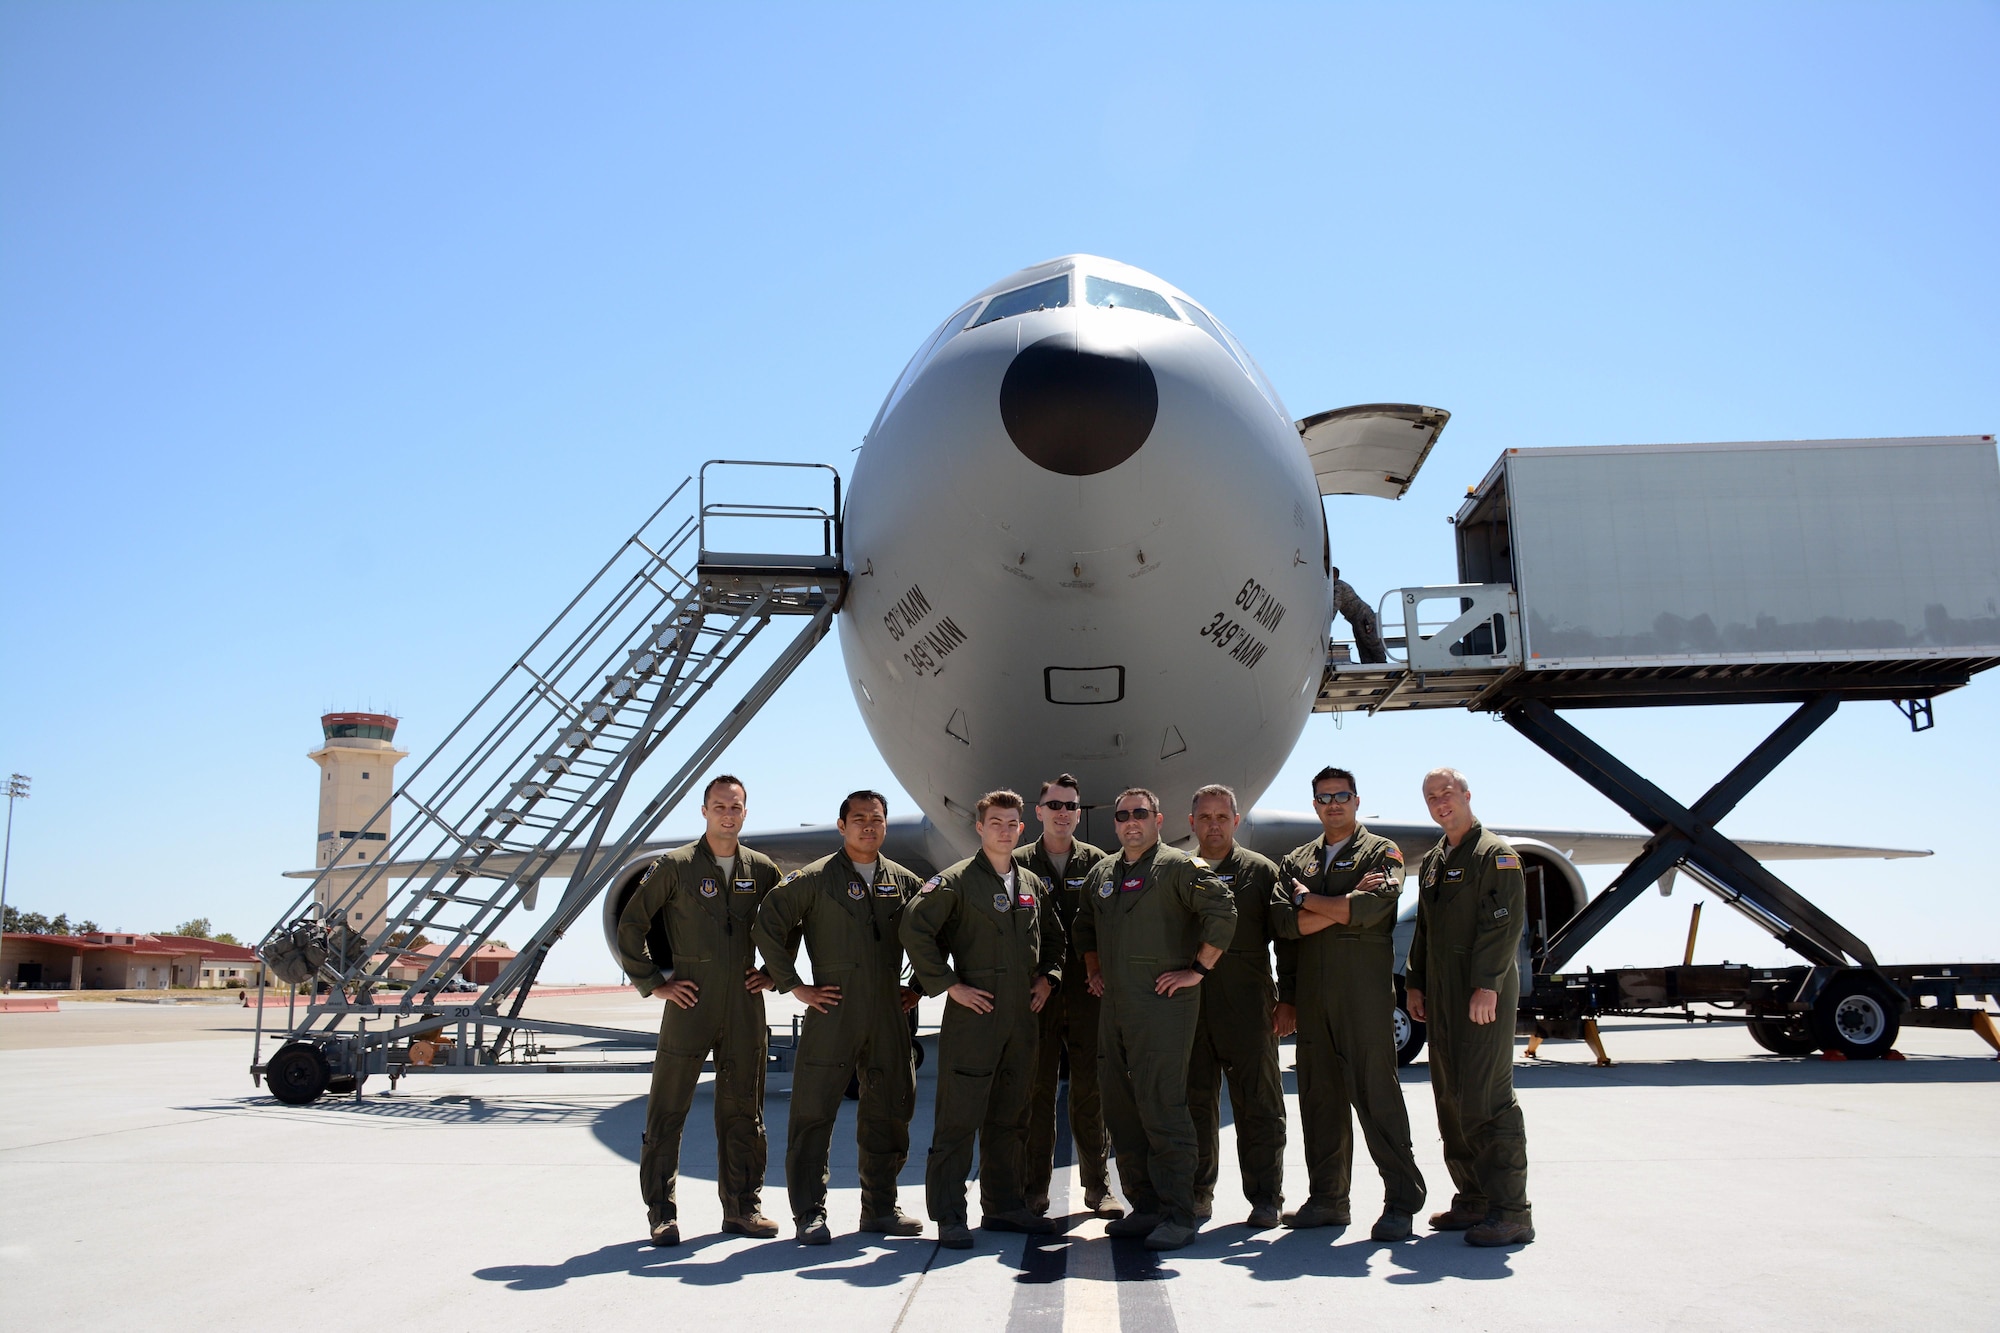 At mission complete, the crew poses for a photo outside the KC-10 Extender on the Travis Air Force Base flightline July 16, 2016. An aircrew of 70th Air Refueling Squadron members departed Travis Air Force Base, Calif. July 11, 2016 en route to Royal Air Force Base Fairford in Gloucestershire, England. The purpose of the trip is to refuel F-35A Lightning II jet fighters that are returning to the United States after participating in the world's largest air show. (U.S. Air Force photos by Staff Sgt. Madelyn Brown) 